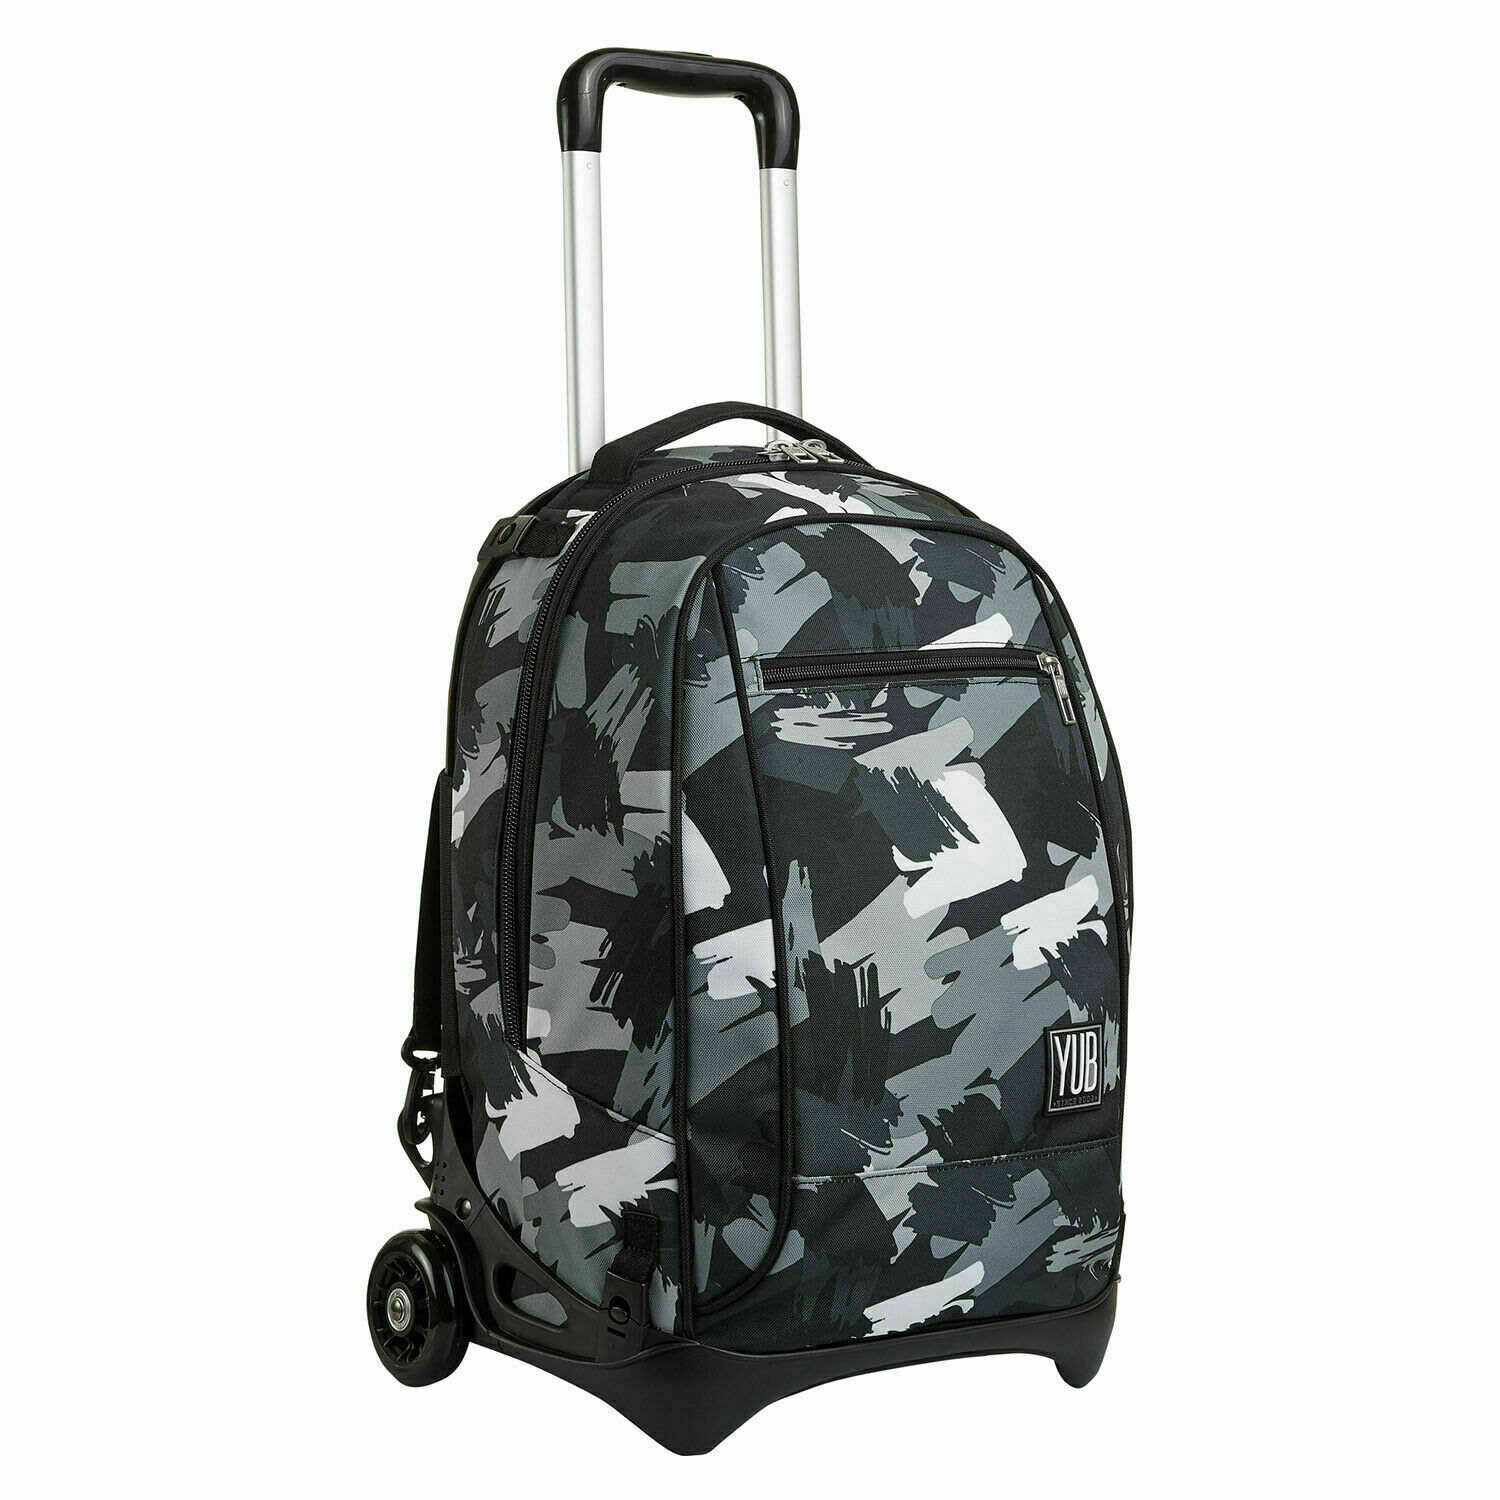 Featured image for “Trolley YUB Jack 2 RUOTE Painted Graphic CAMO Nero”